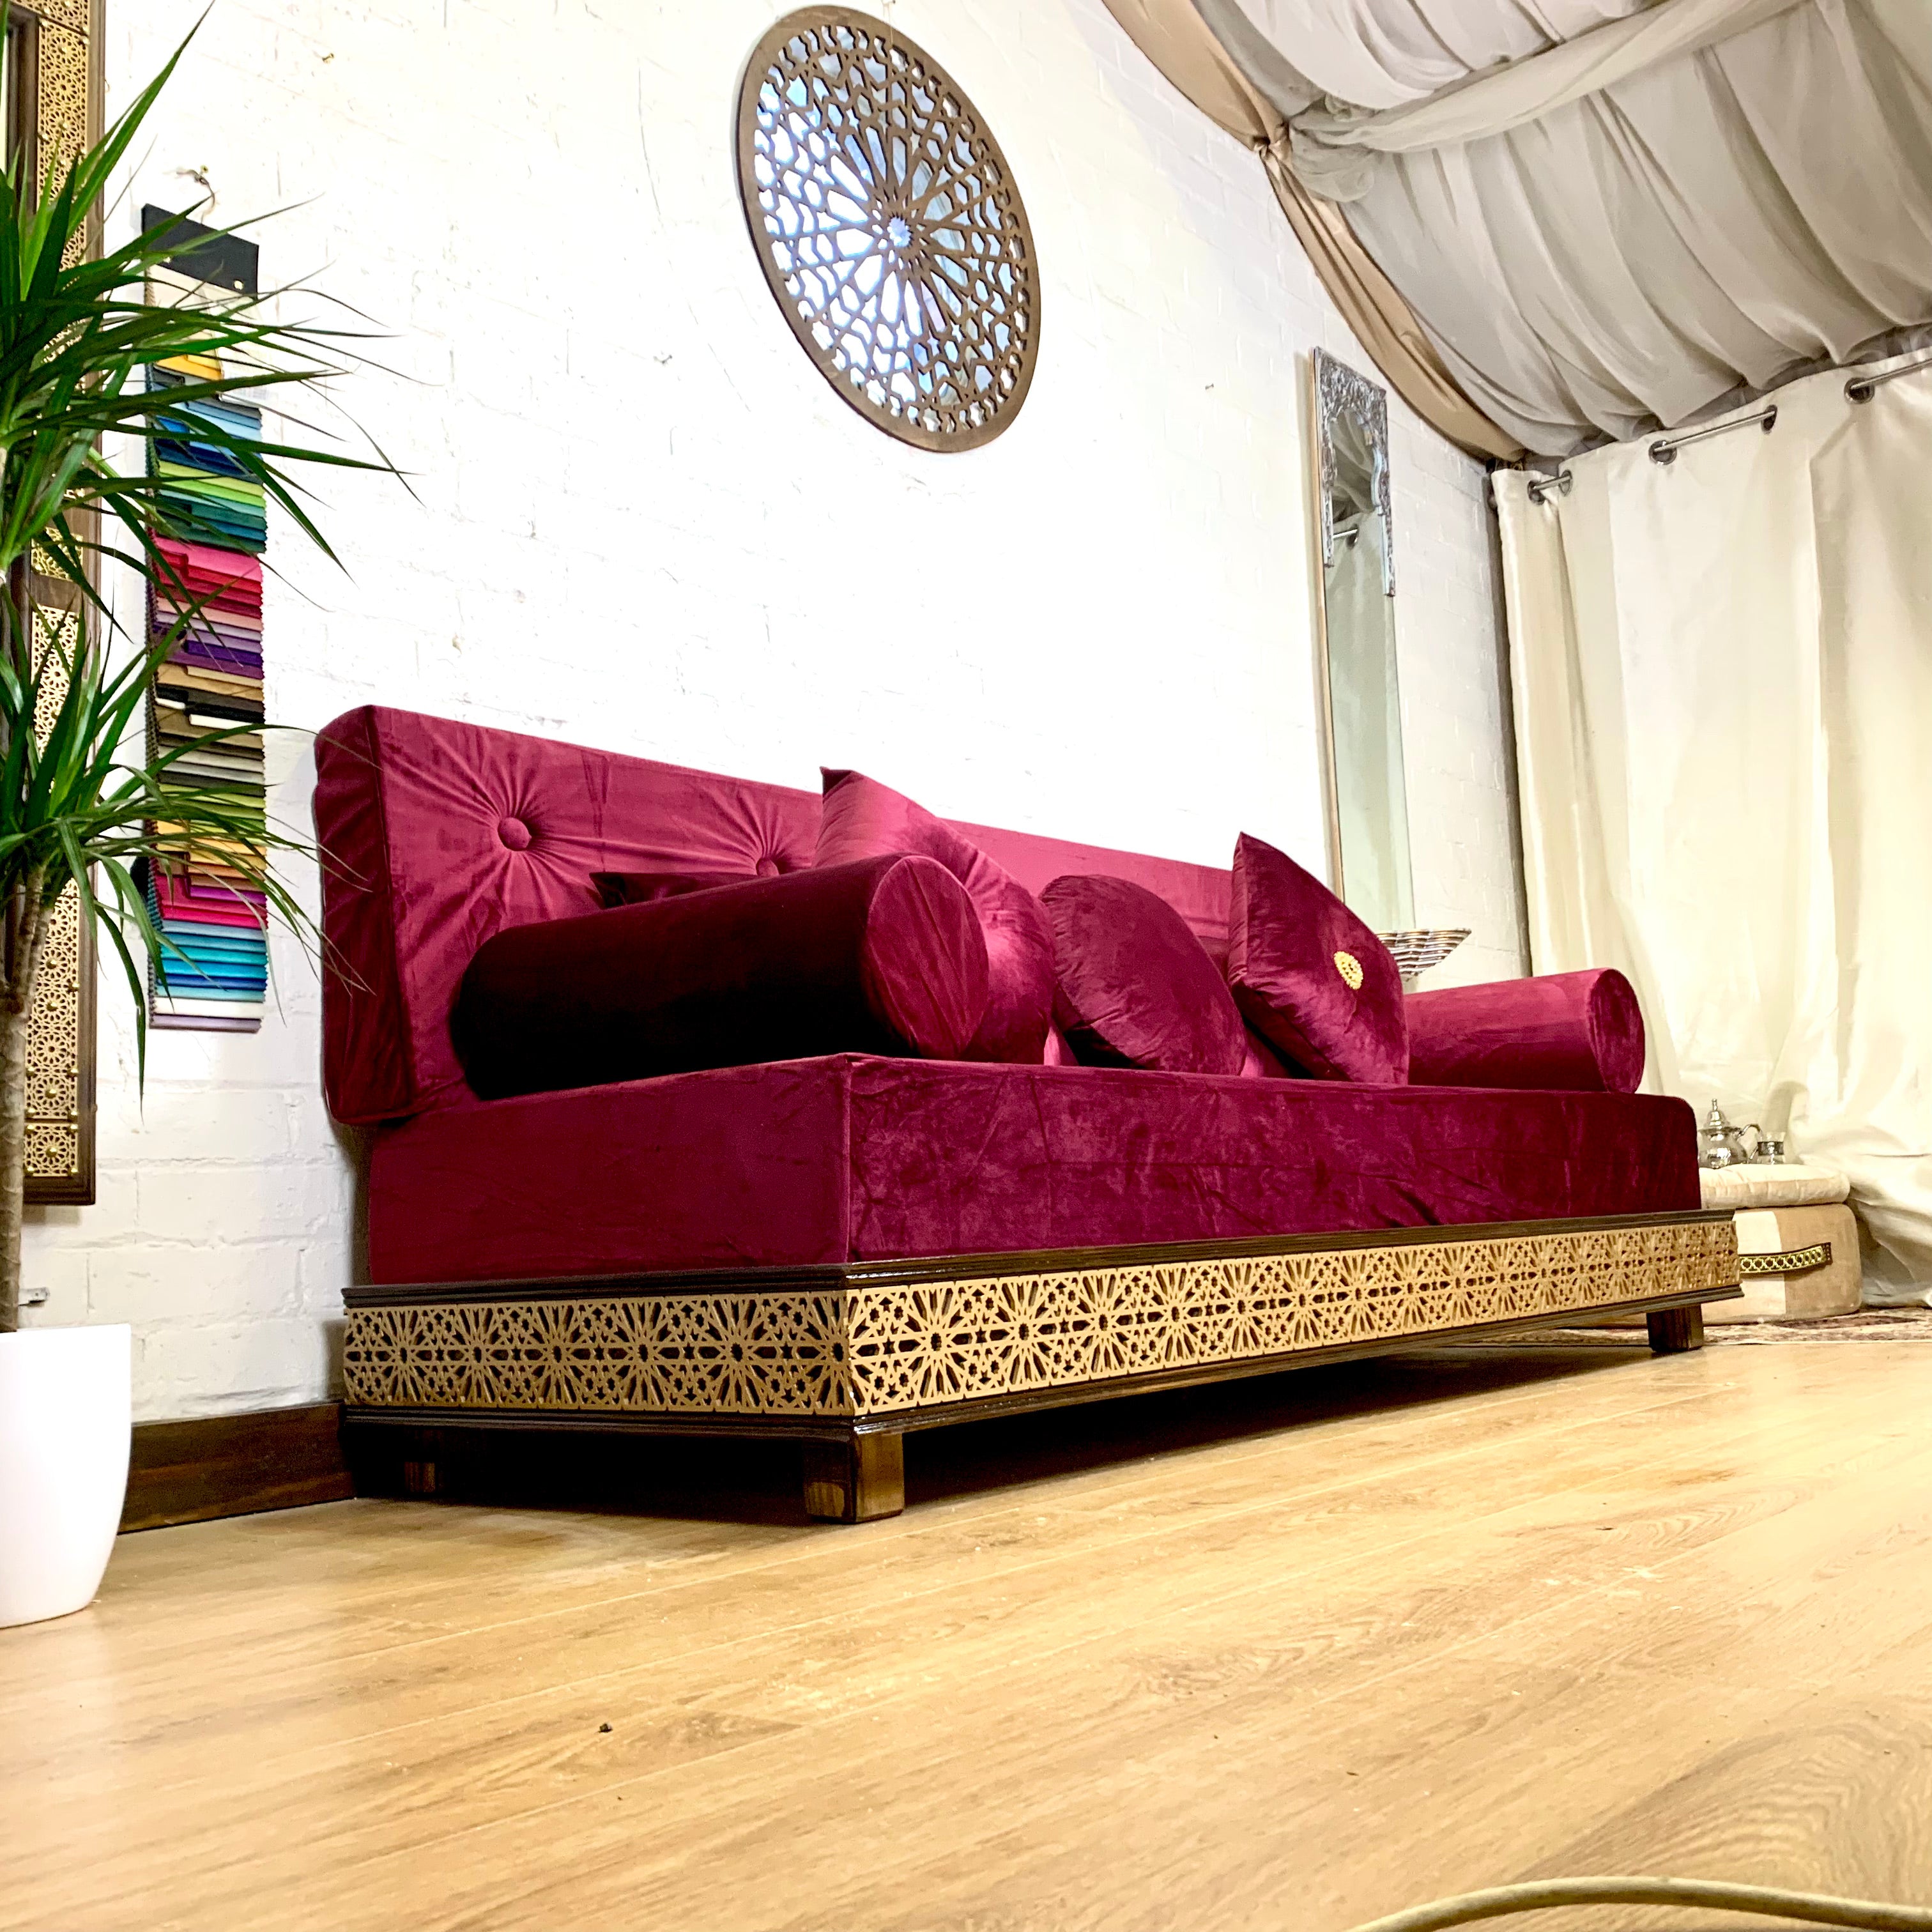 Luxurious Arabesque Moroccan Sofa Moroccan Daybed with carvings in Burgundy Velvet.